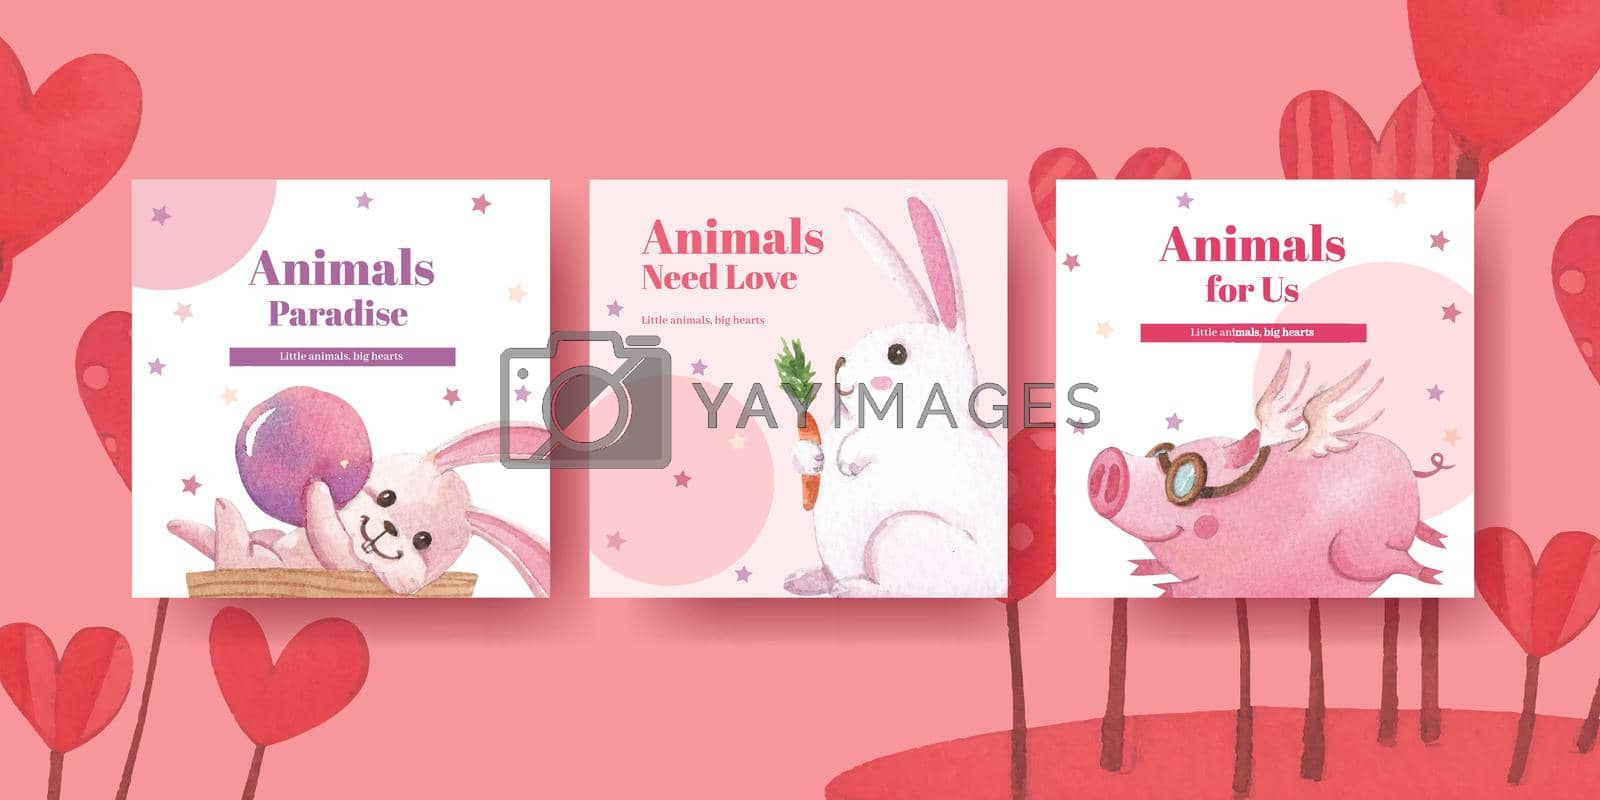 Advertise template with happy animals concept design watercolor illustration
